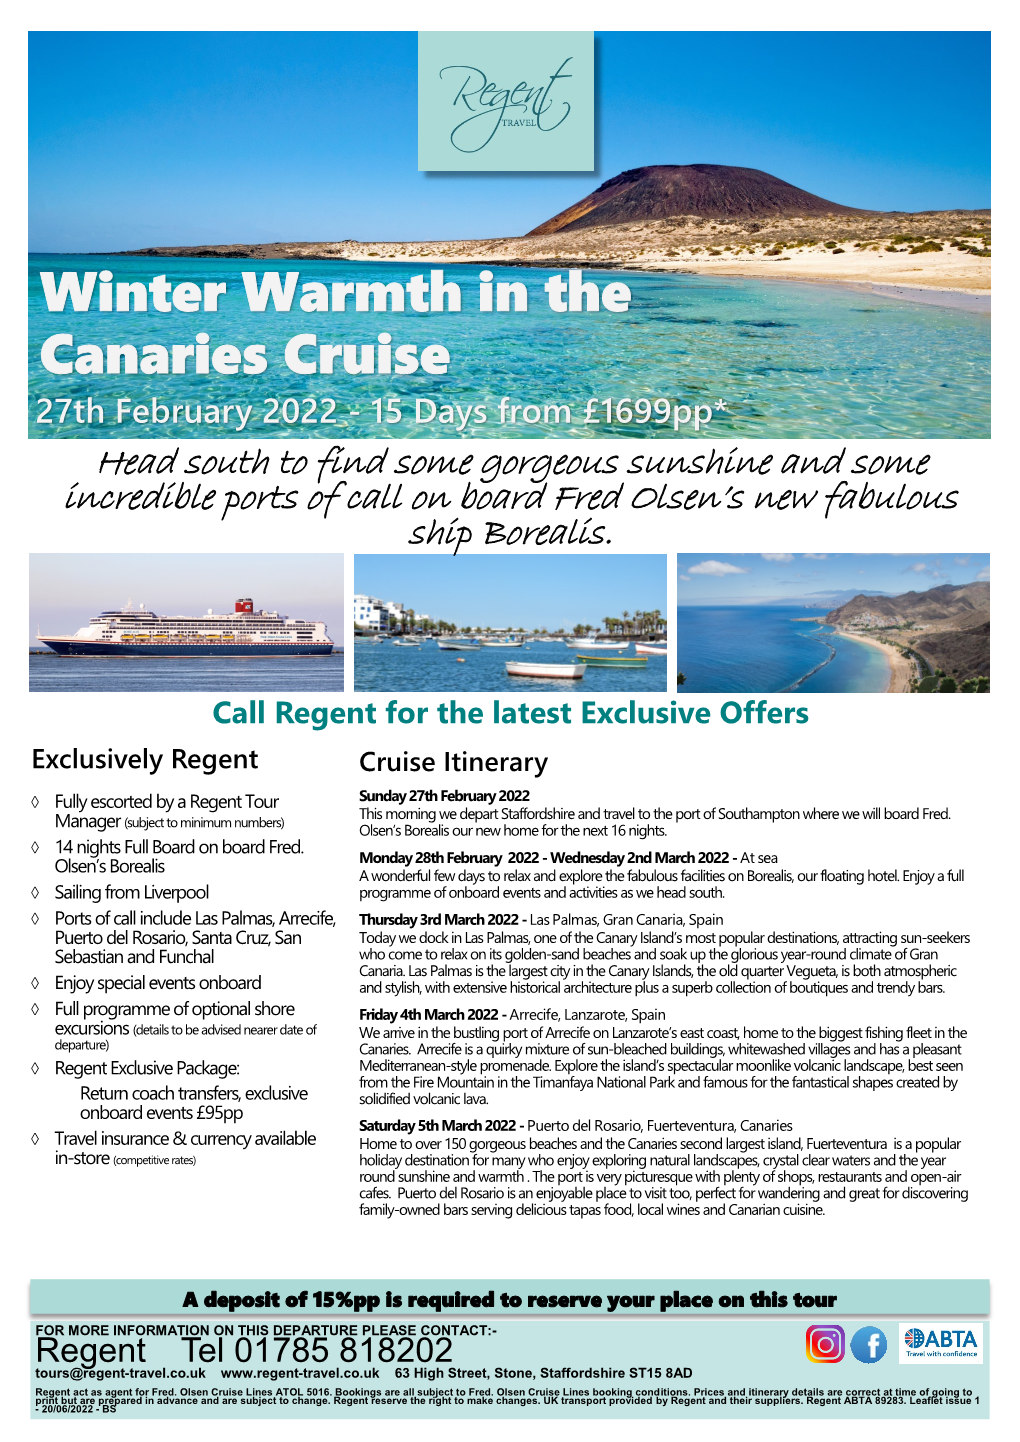 Winter Warmth in the Canaries Cruise